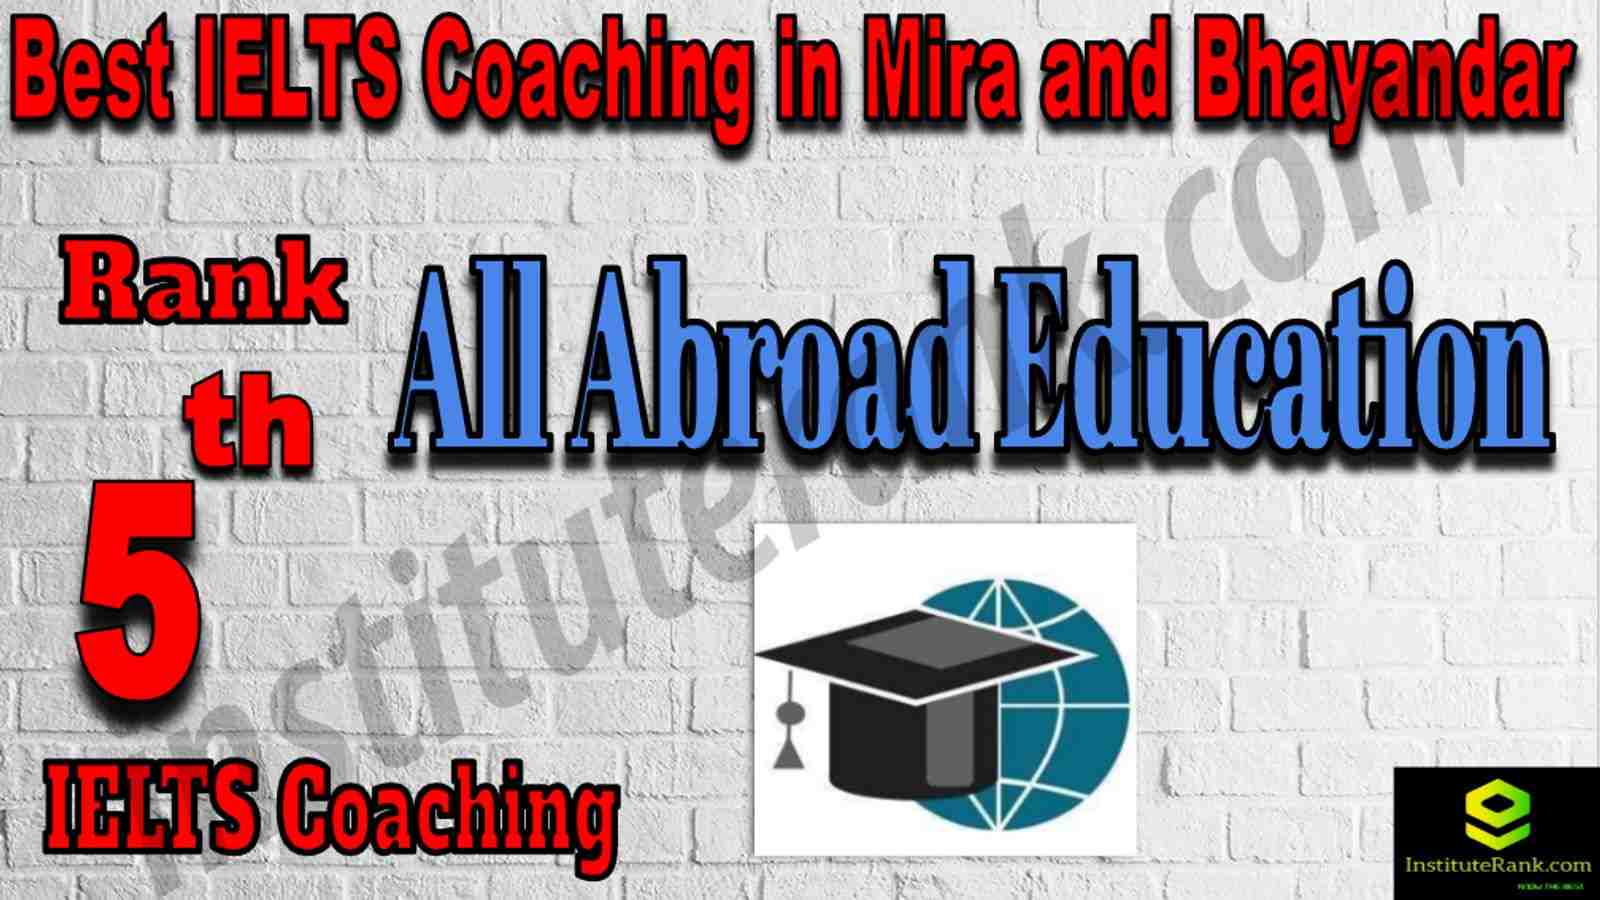 5th Best IELTS Coaching in Mira and Bhayandar